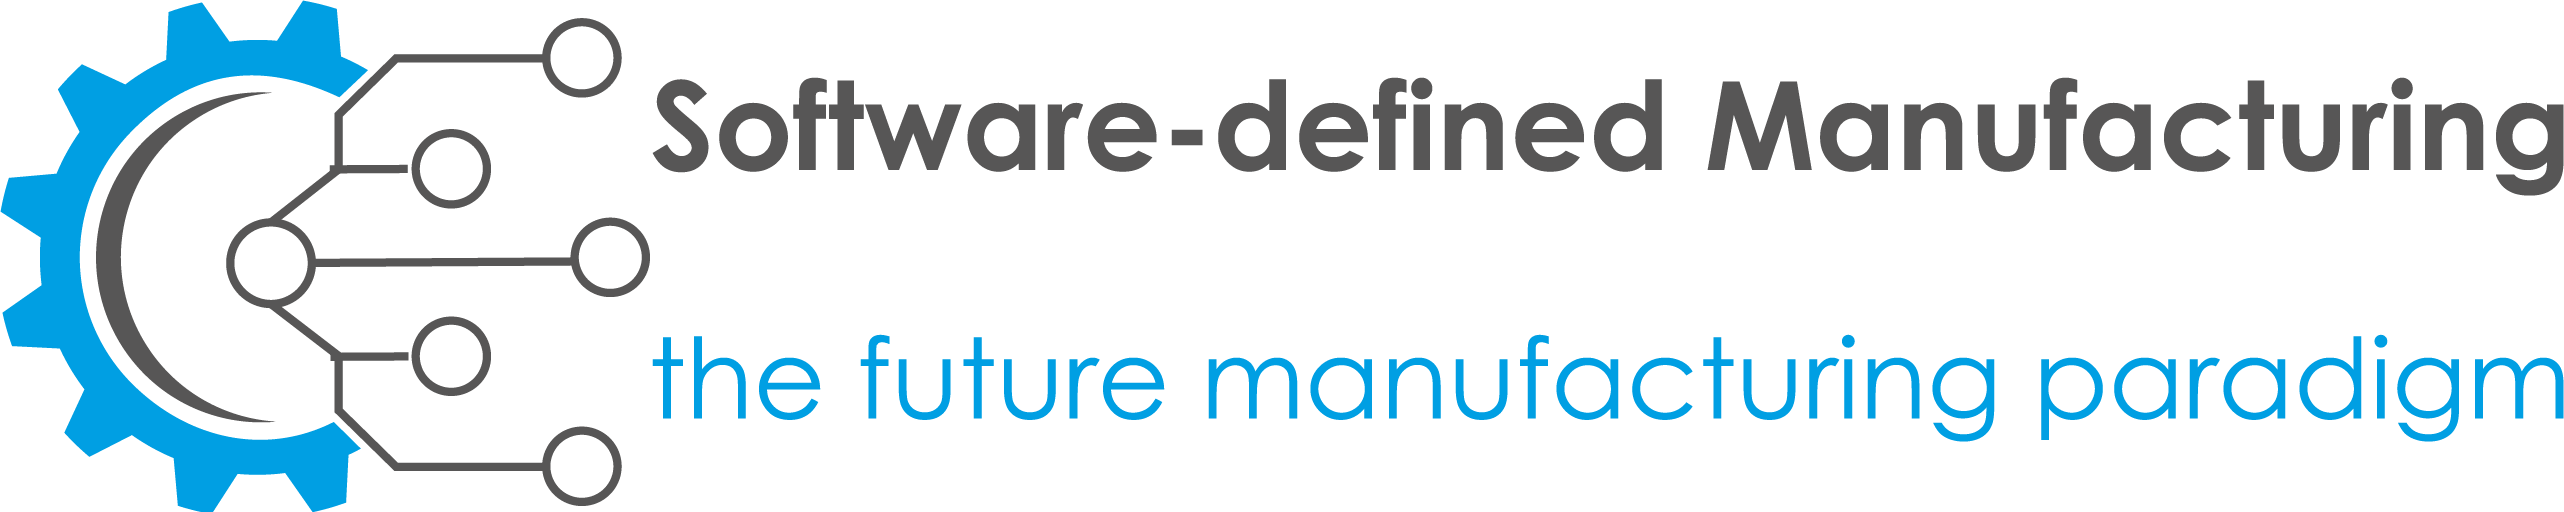 Software-defined Manufacturing